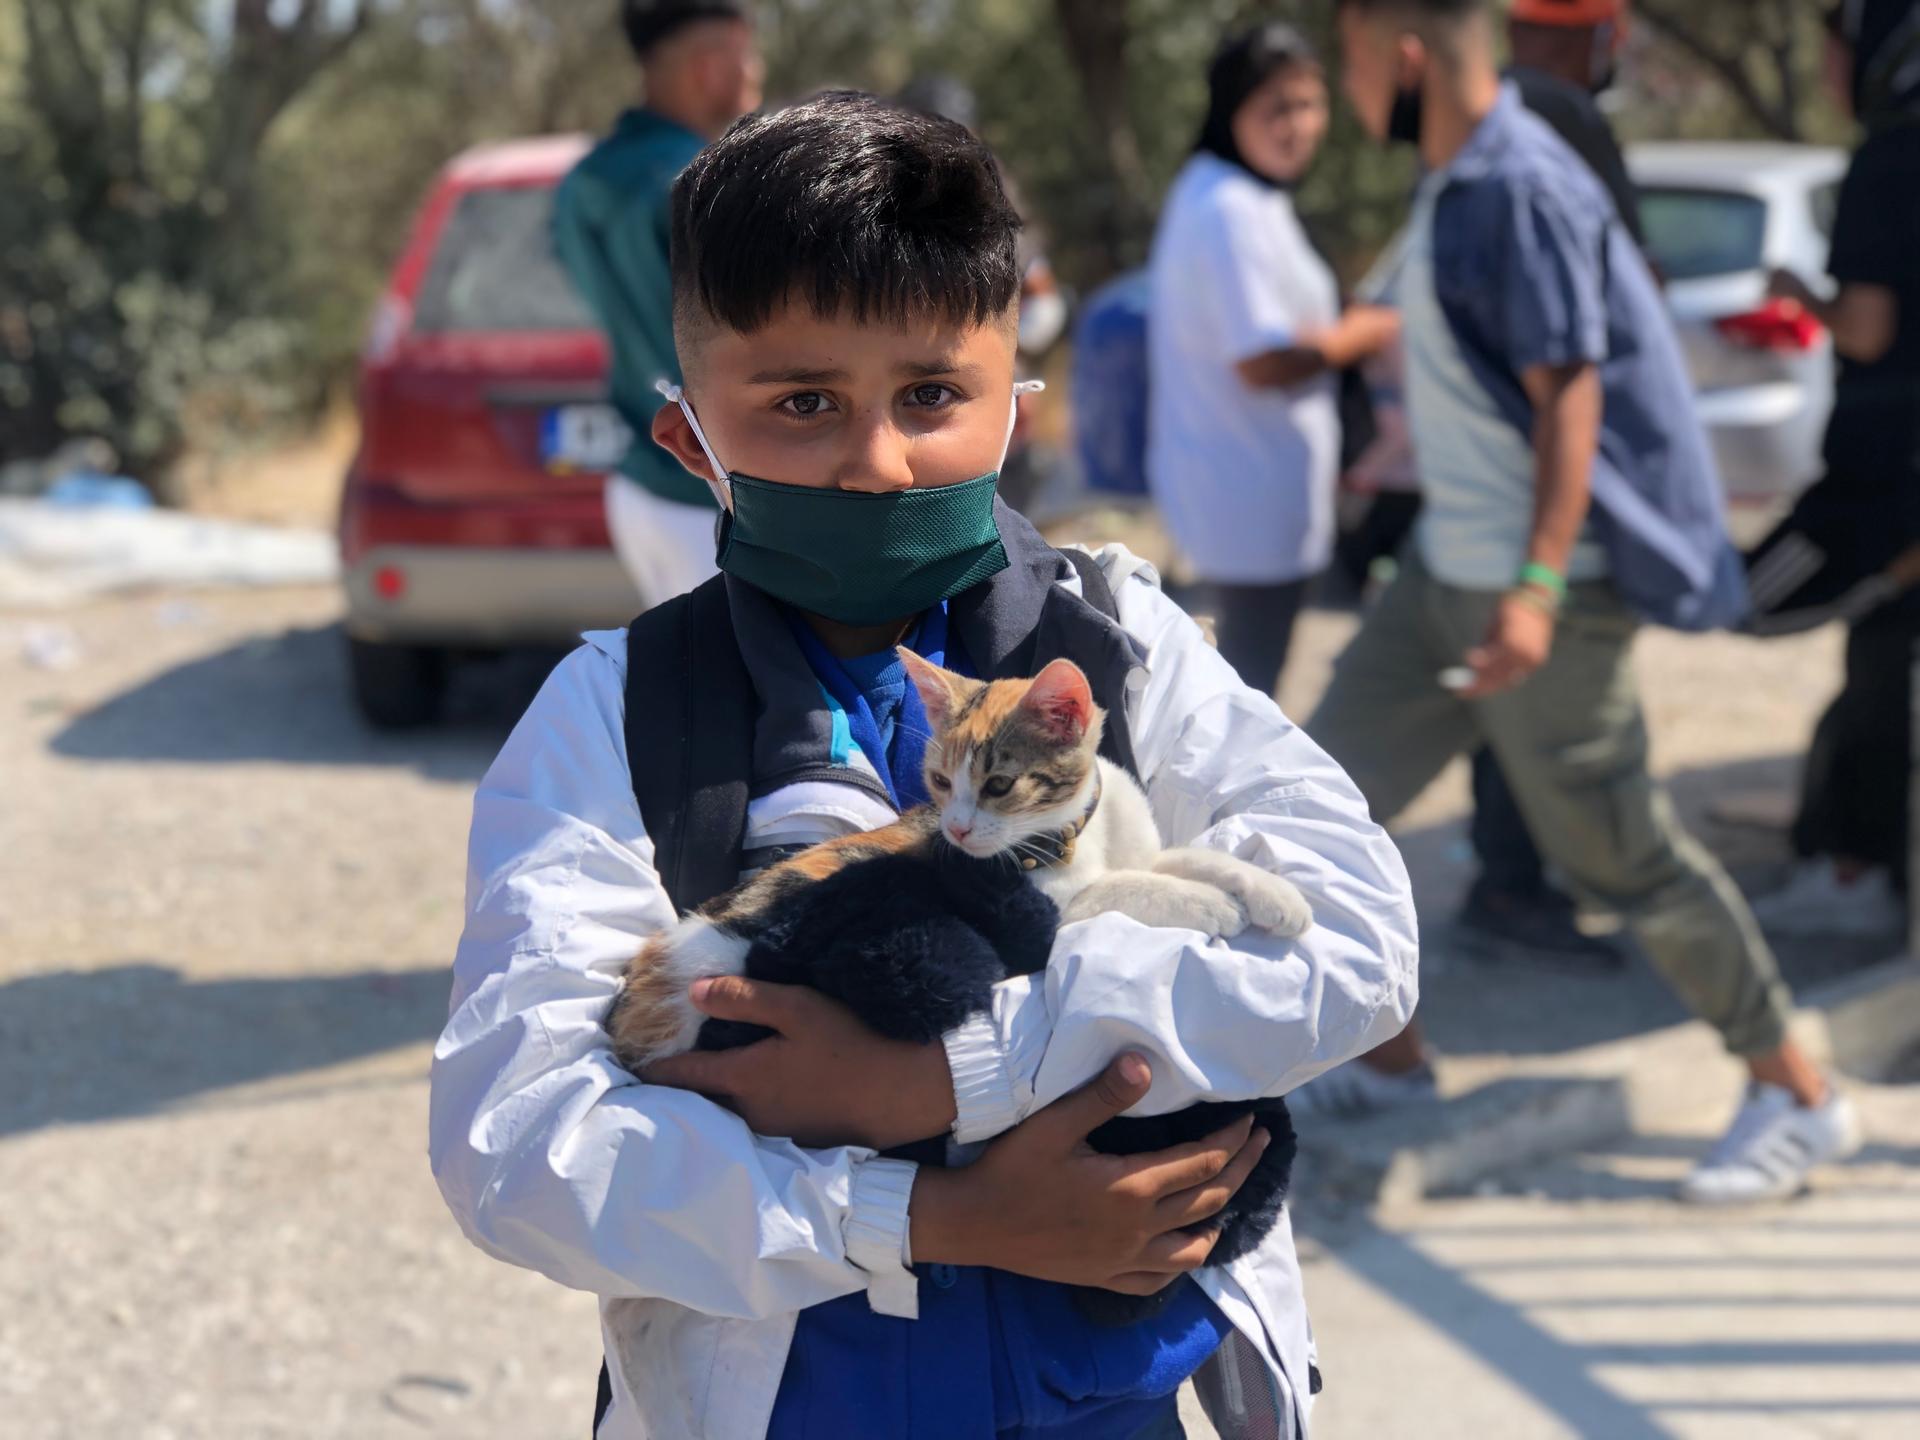 Mohammad, a young, Afghan asylum-seeker, found a cat he named Kuchulu while at Moria. He worries he won't be able to bring his feline friend into the new camp.